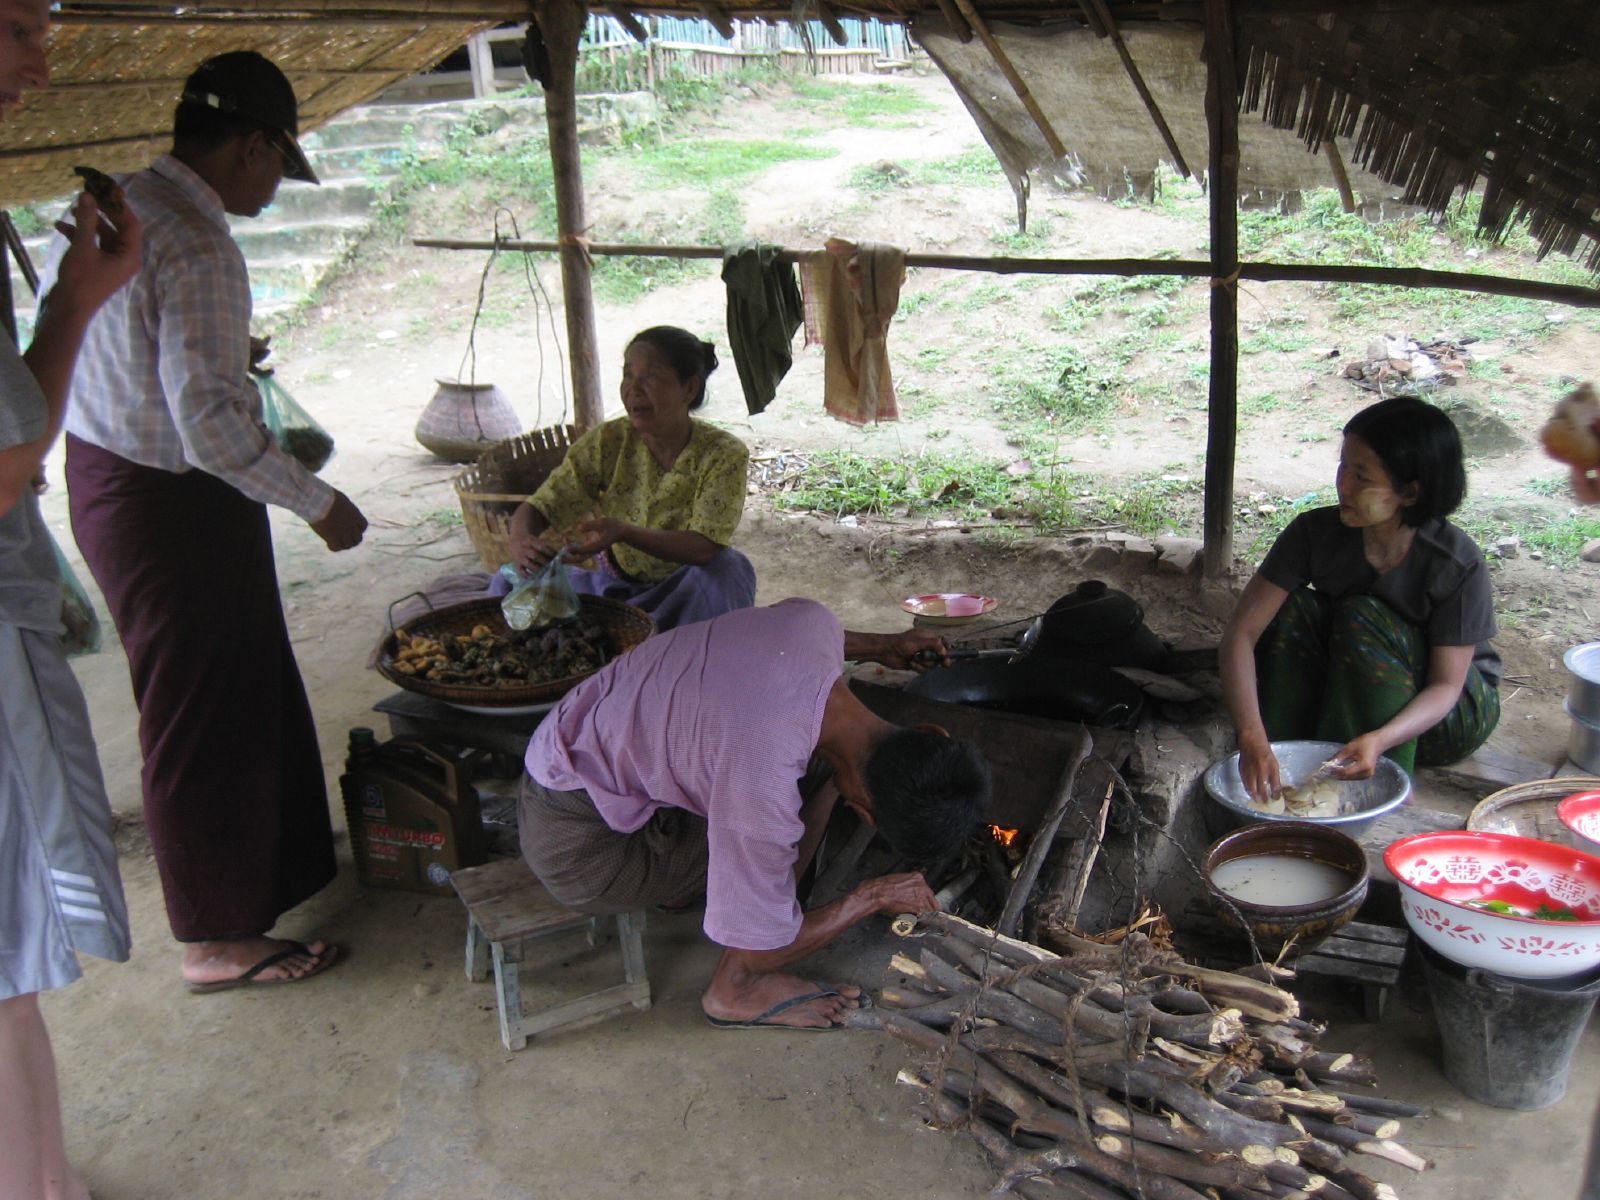 the people are preparing food on a wooden stove